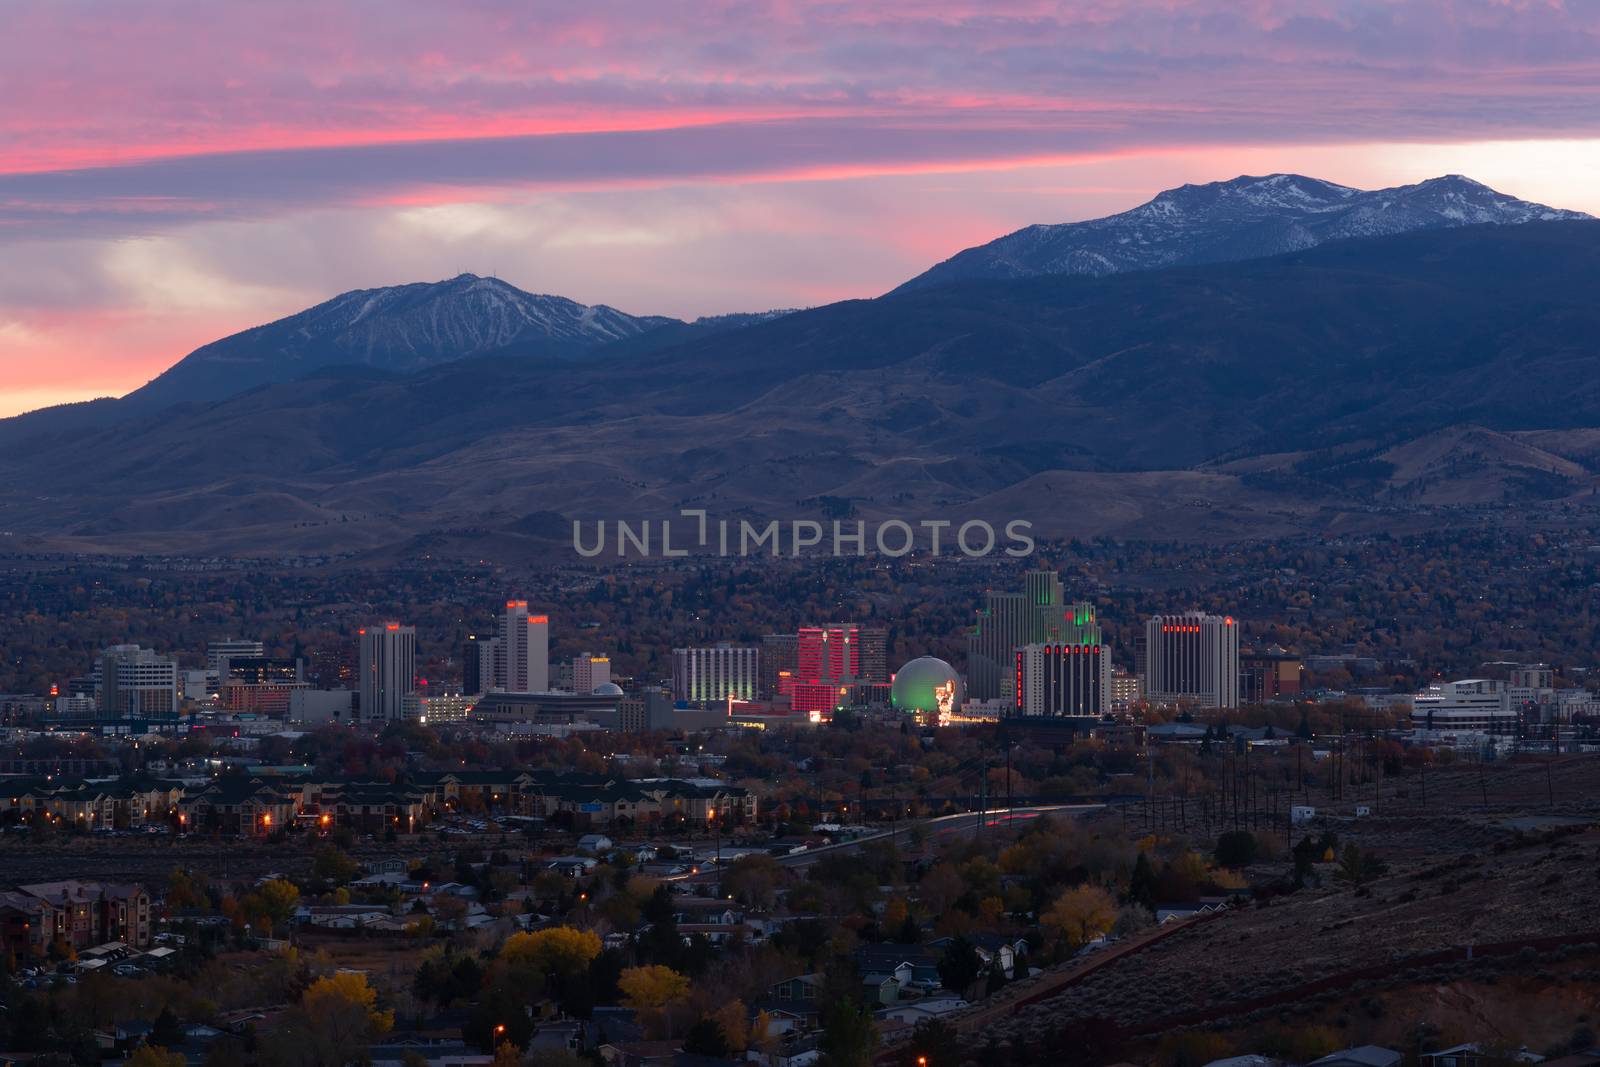 The lights illuminate the sky and the city here in Reno